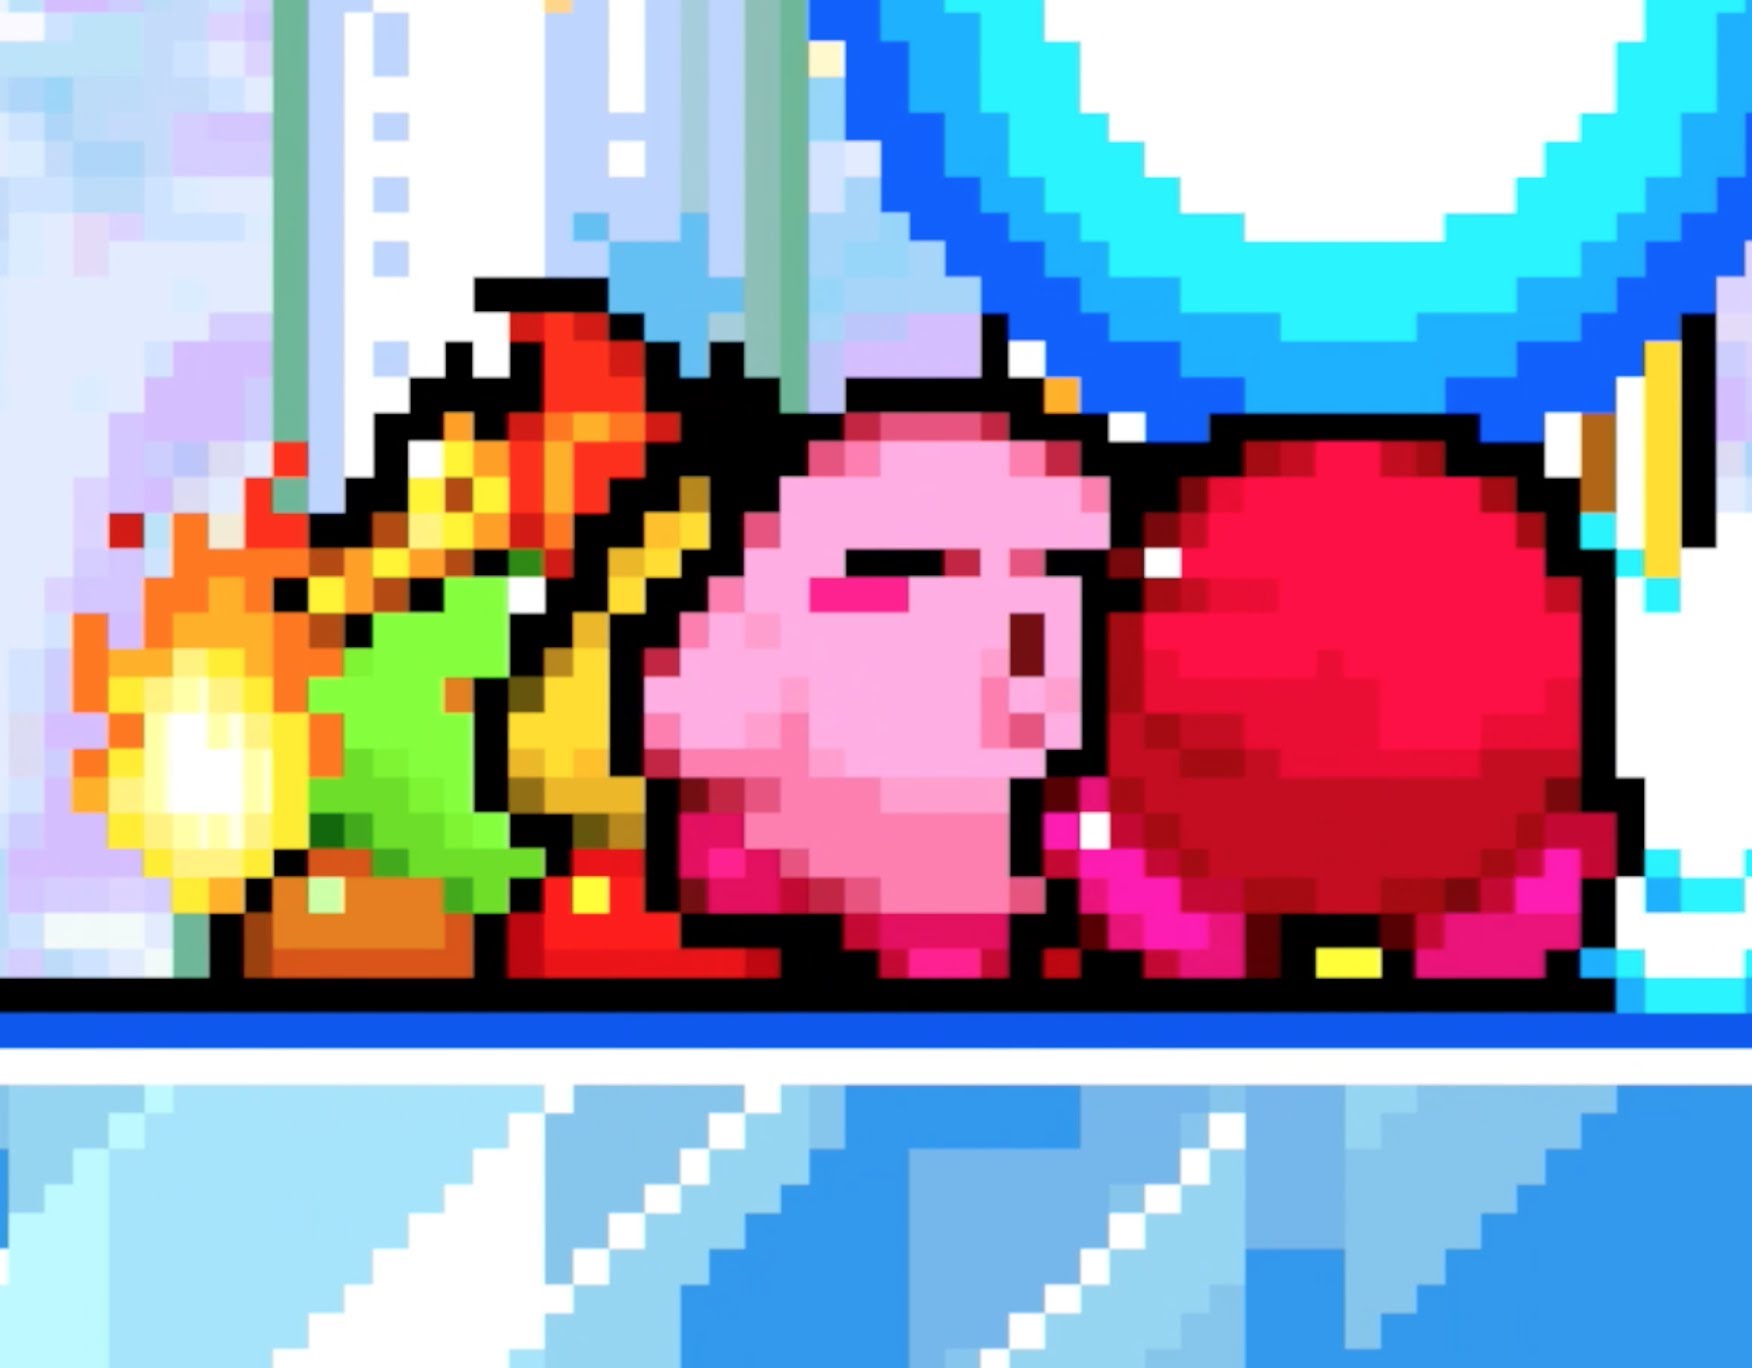 Kirby & The Amazing Mirror Backgrounds, Compatible - PC, Mobile, Gadgets| 1752x1368 px